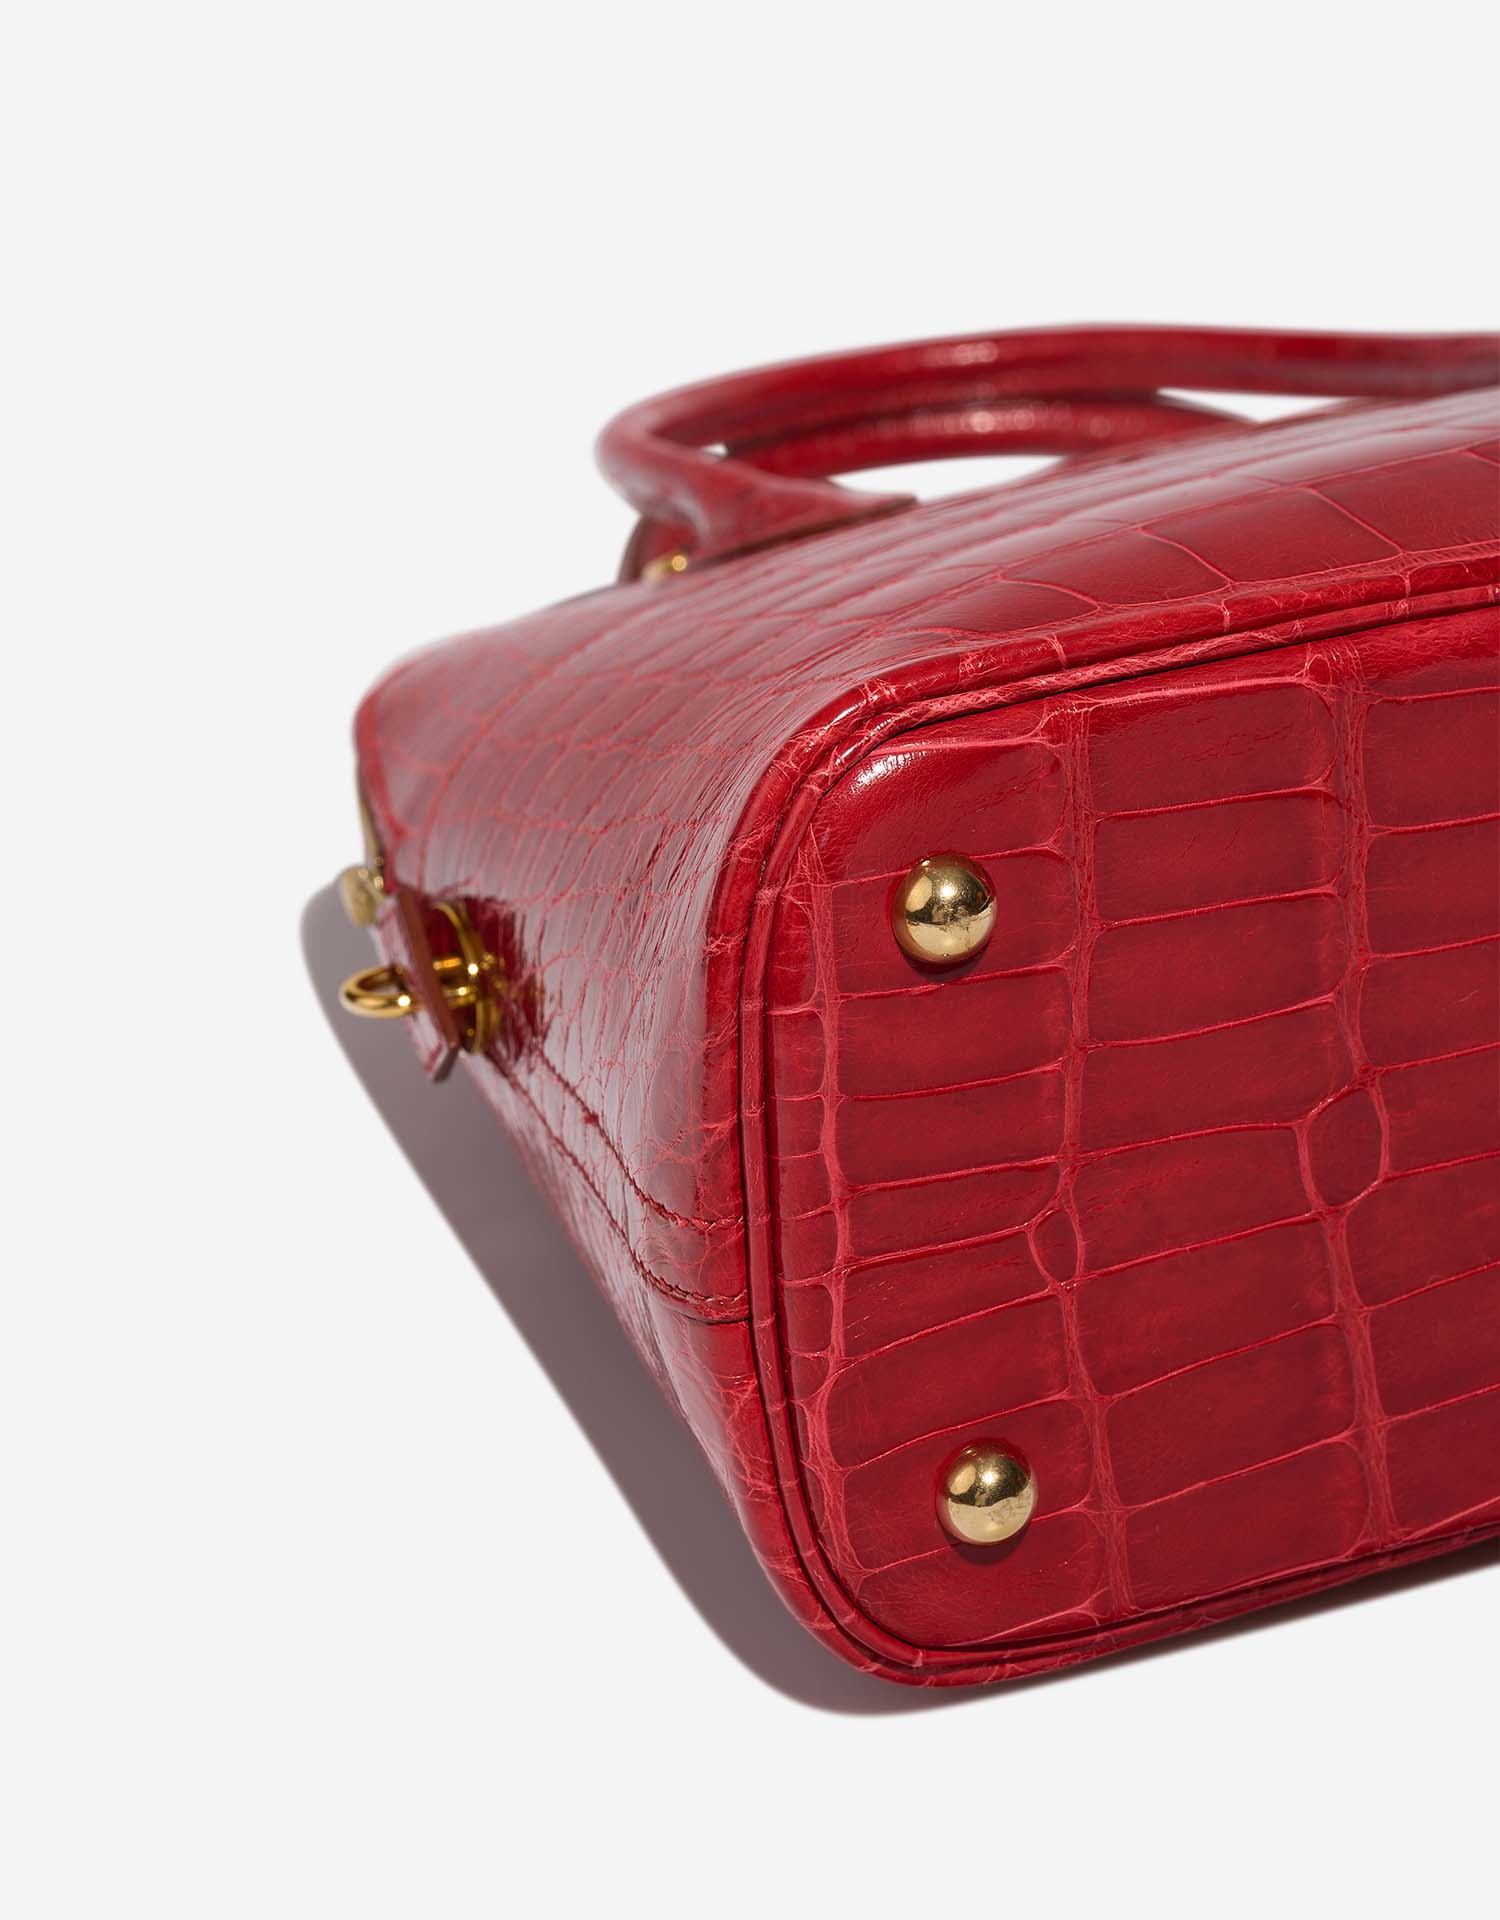 Hermès Bolide 31 Braise signs of wear| Sell your designer bag on Saclab.com